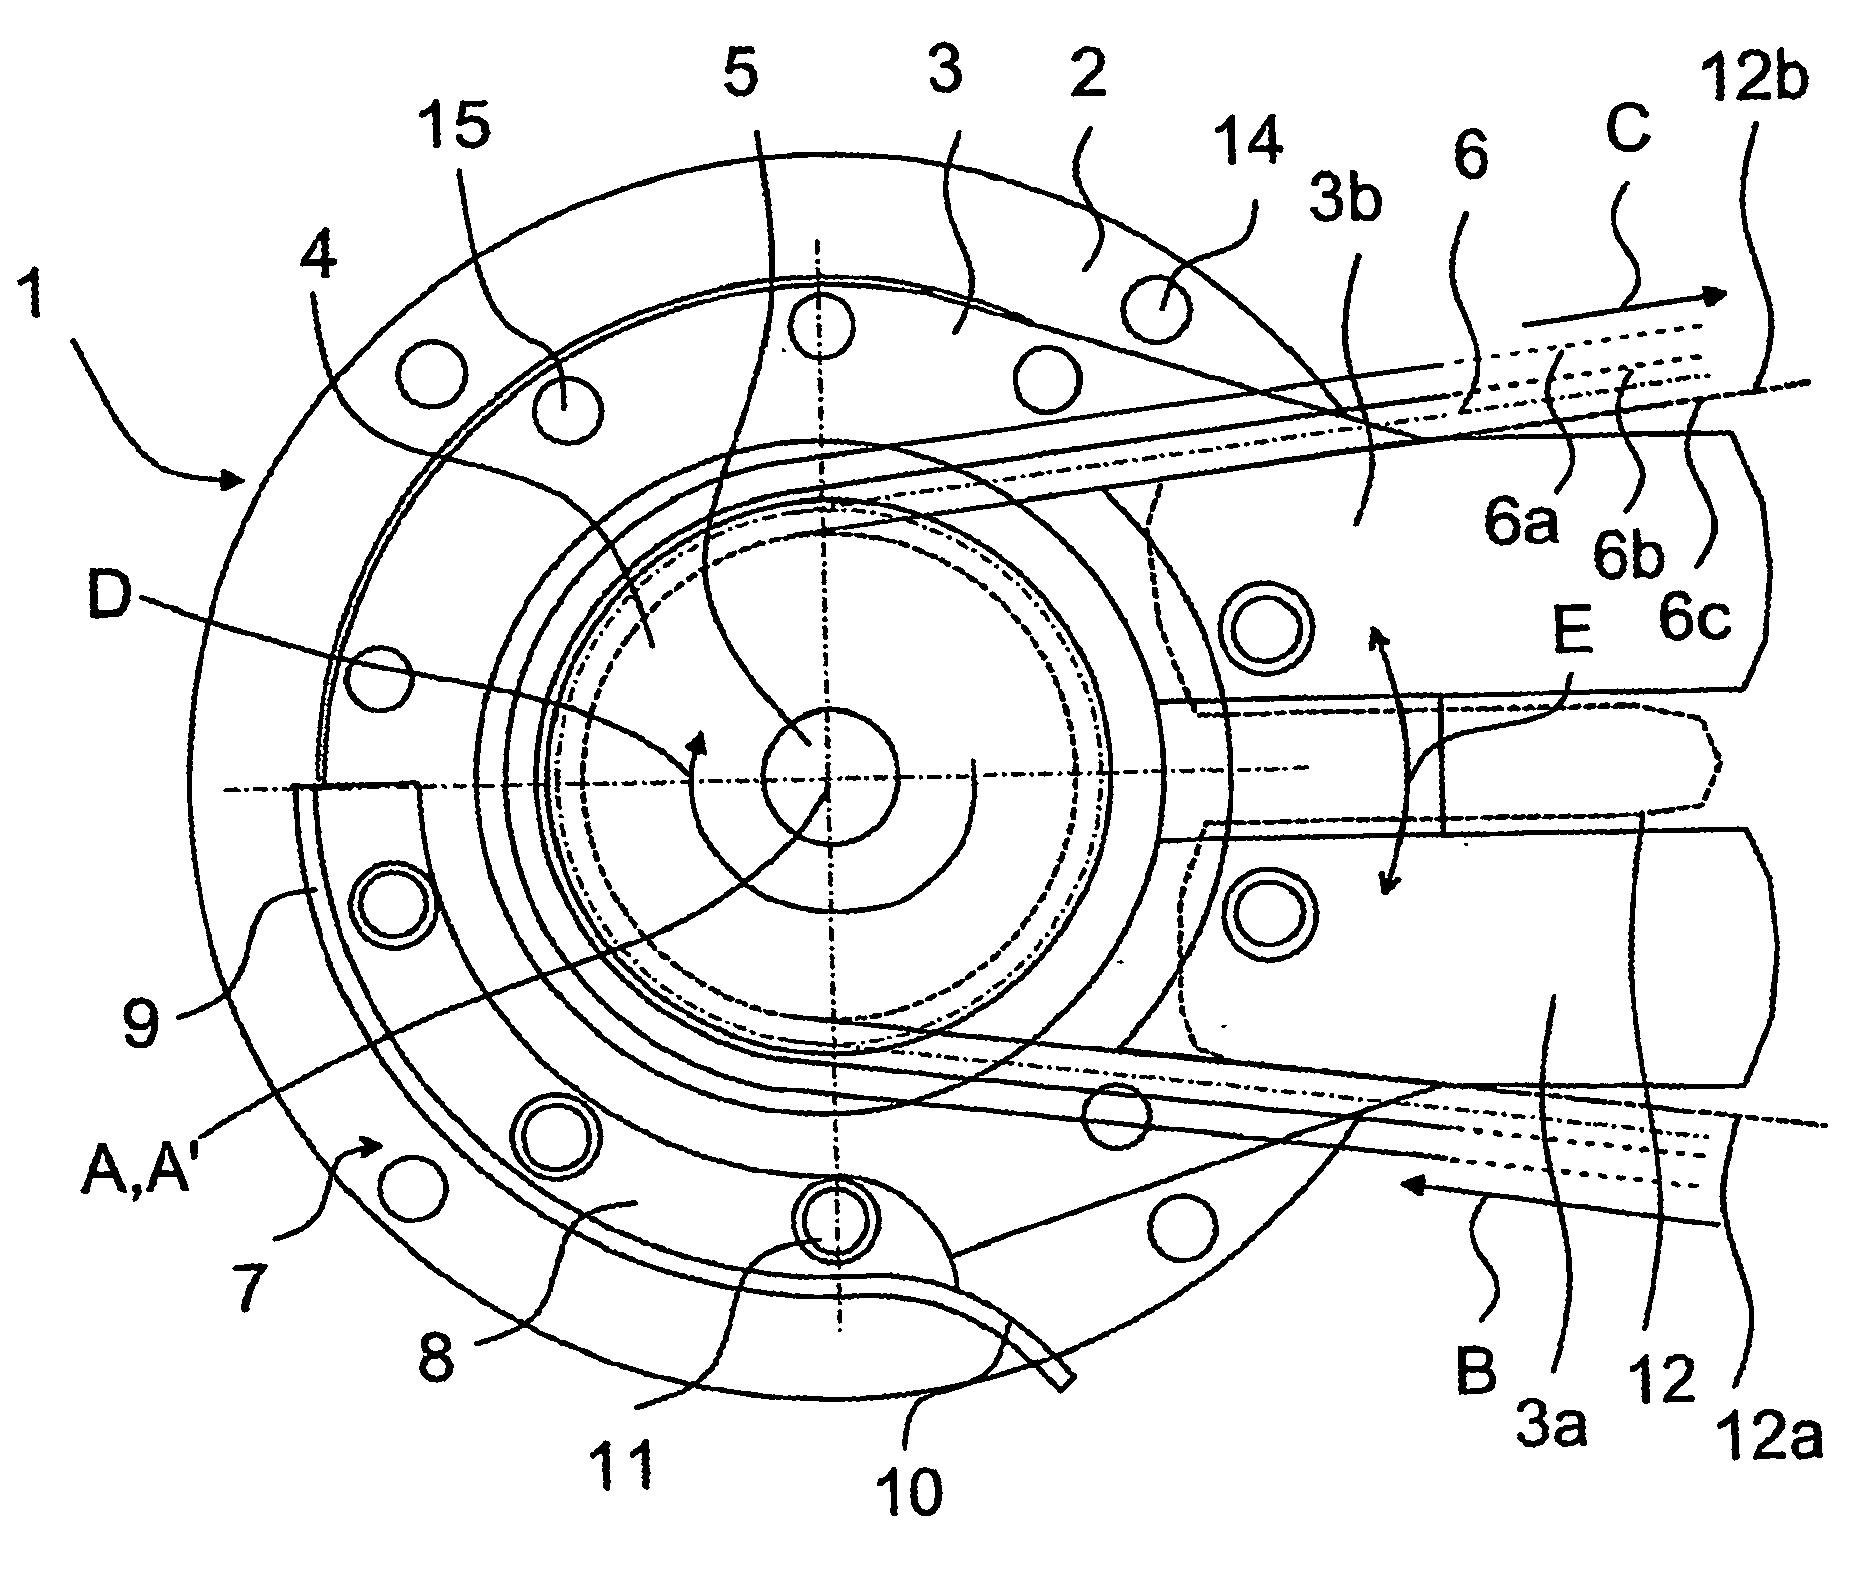 Sawing device and its safety system for precaution of a breaking saw chain